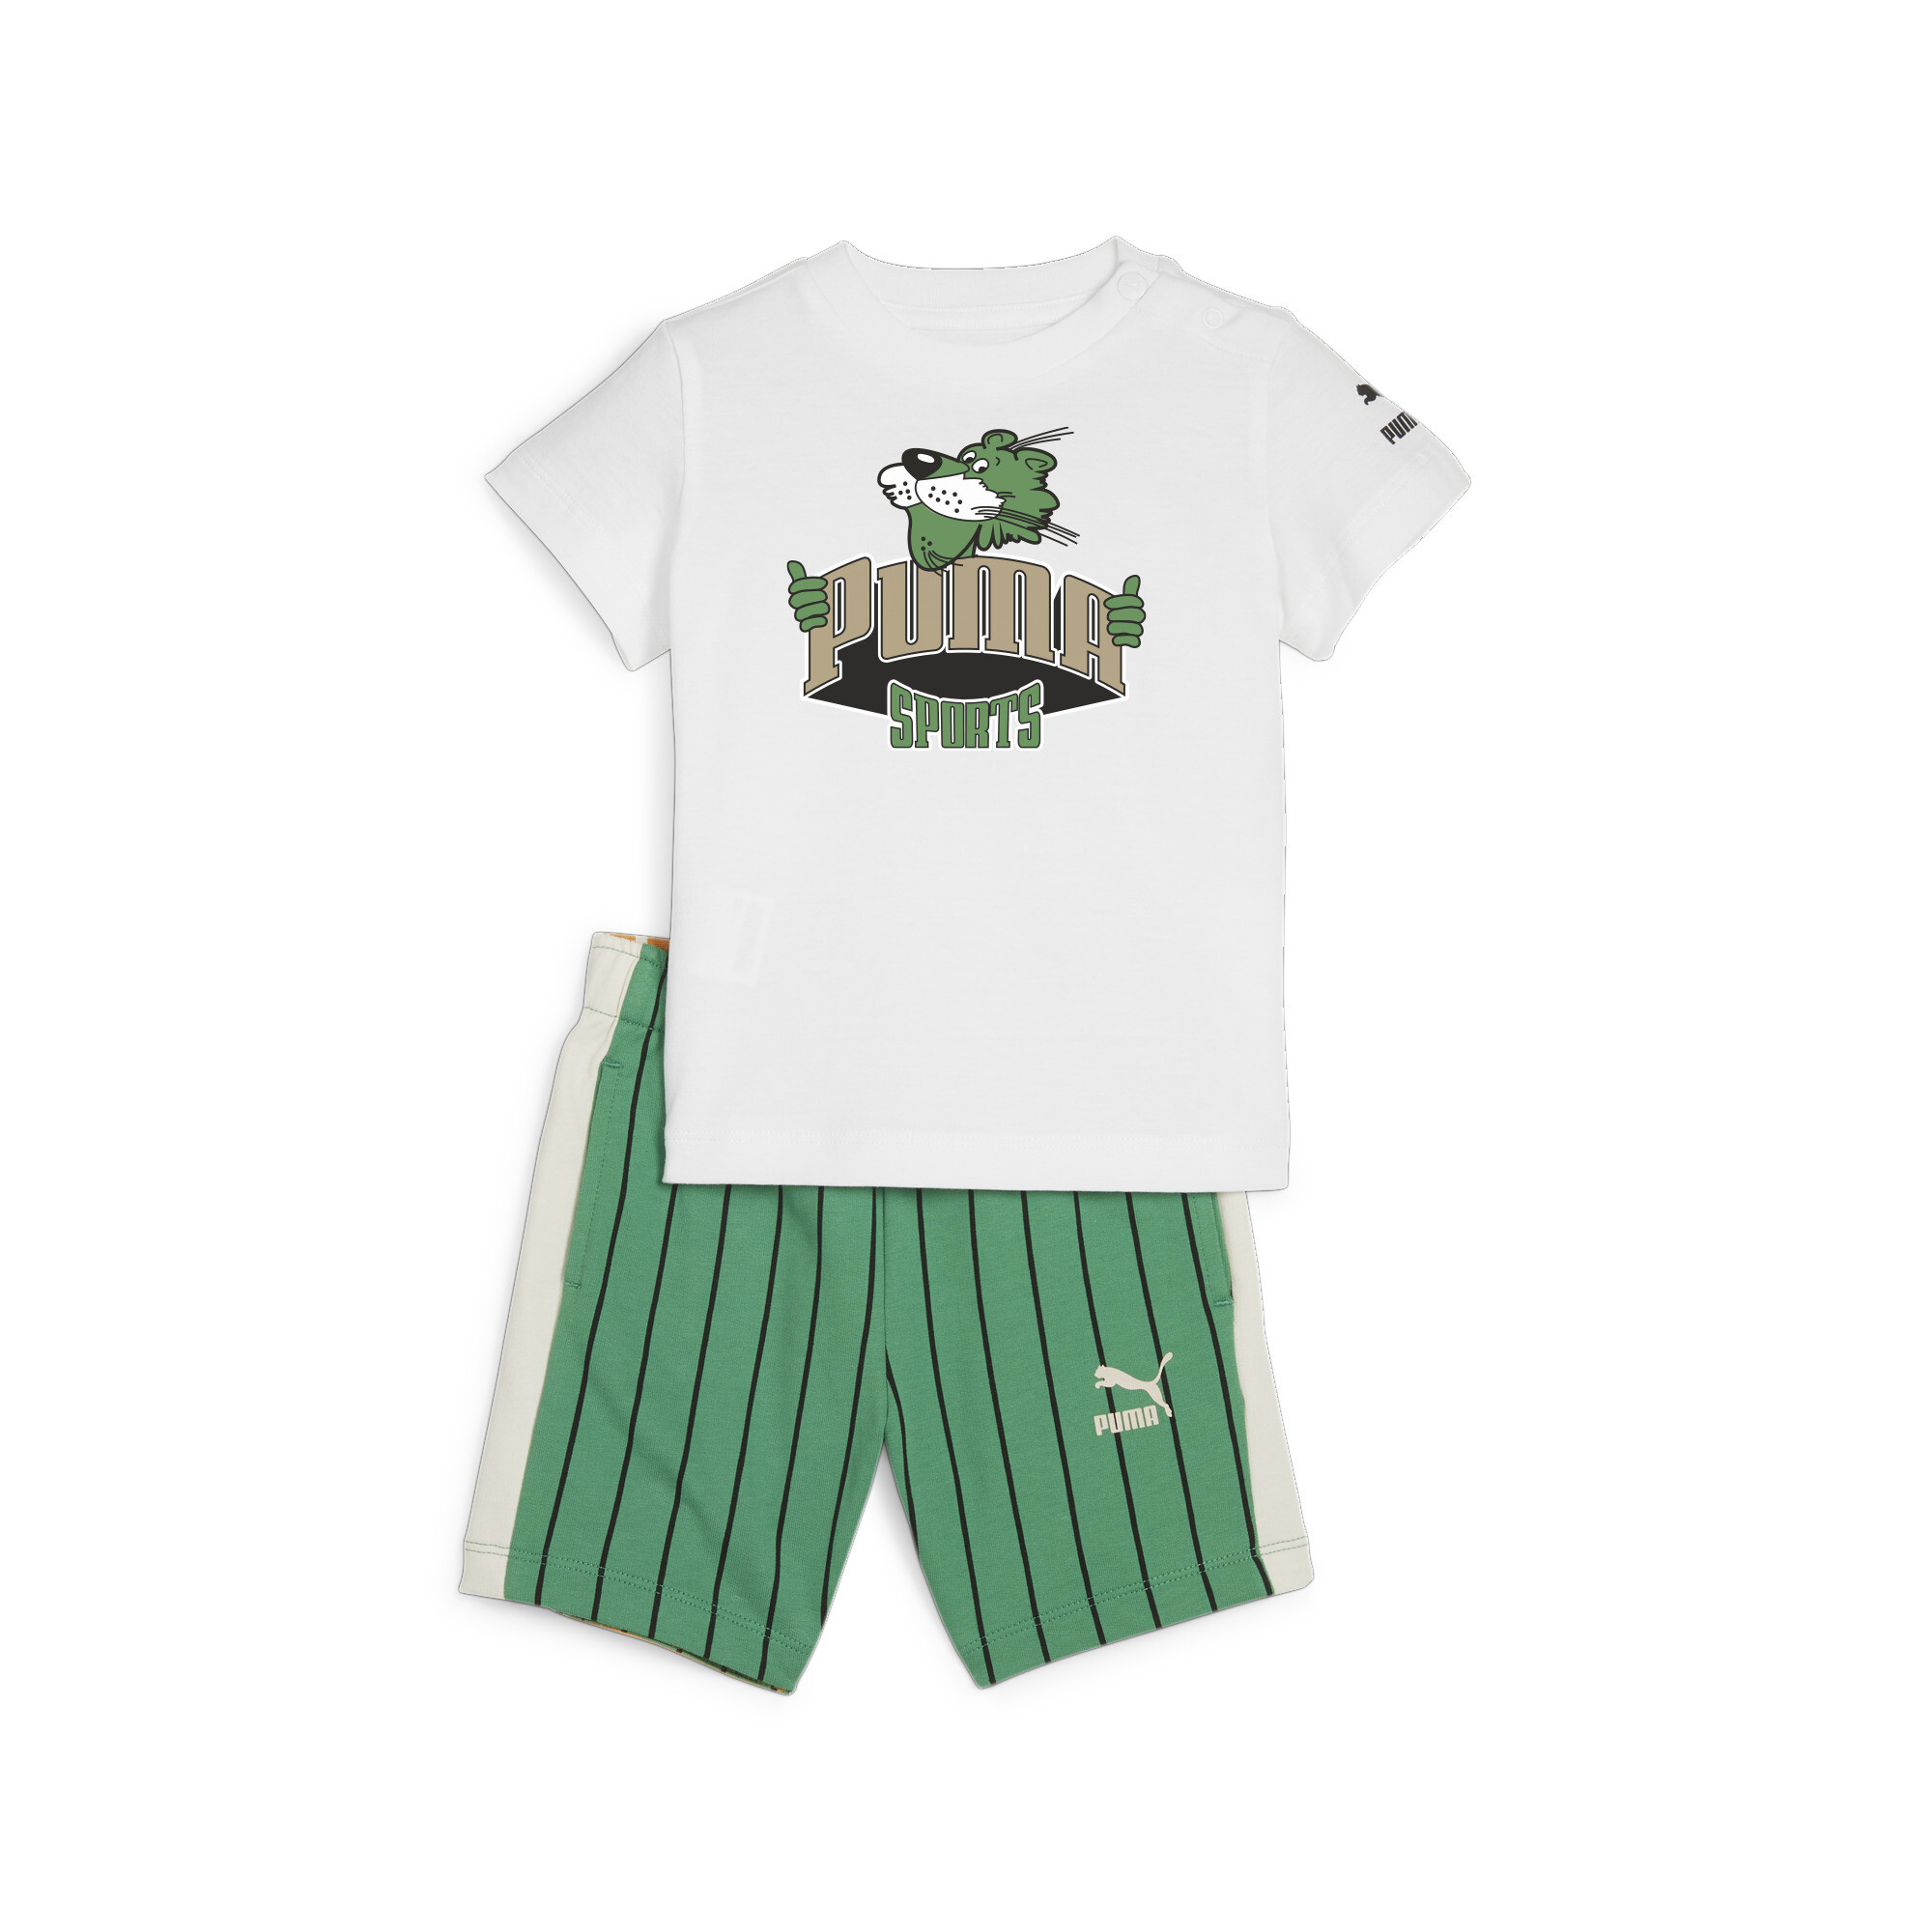 PUMA MINICATS FANBASE Toddlers' Set In White, Size 3-4 Youth